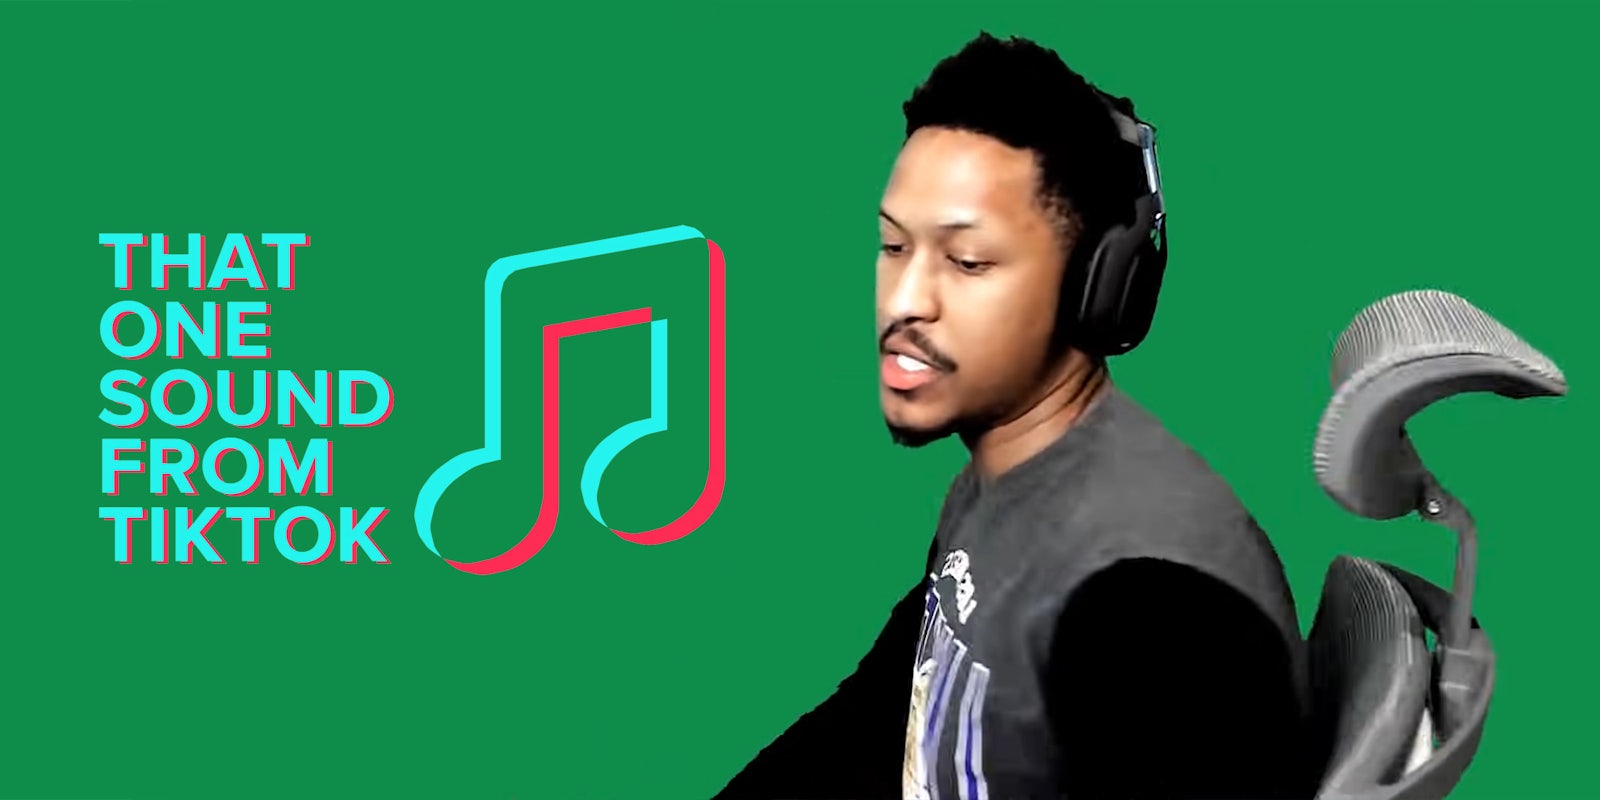 'That one sound from TikTok' logo with man sitting in gaming chair over green screen